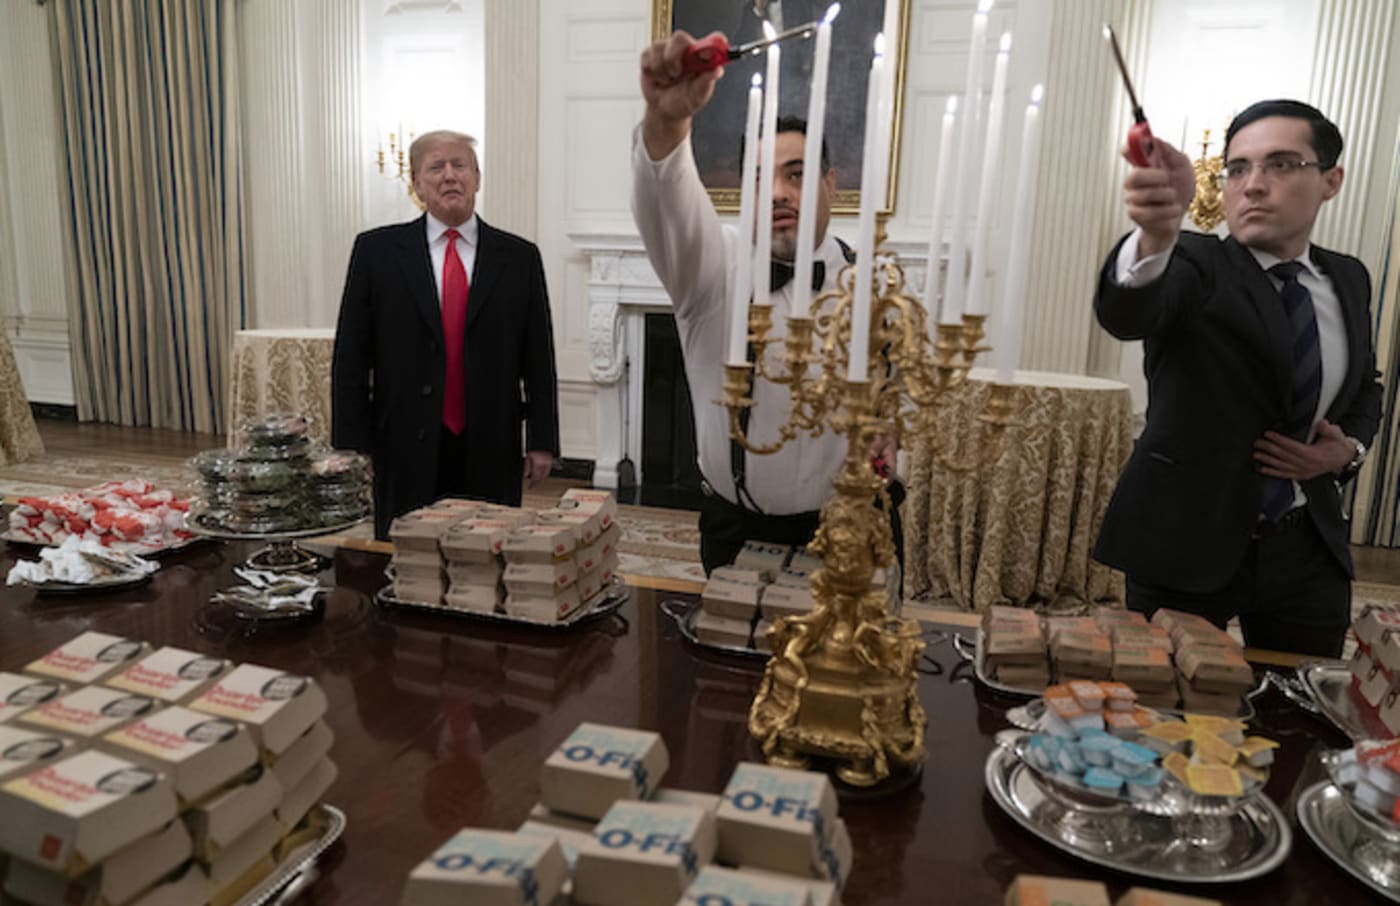 President Donald Trump presents fast food to be served to the Clemson Tigers.